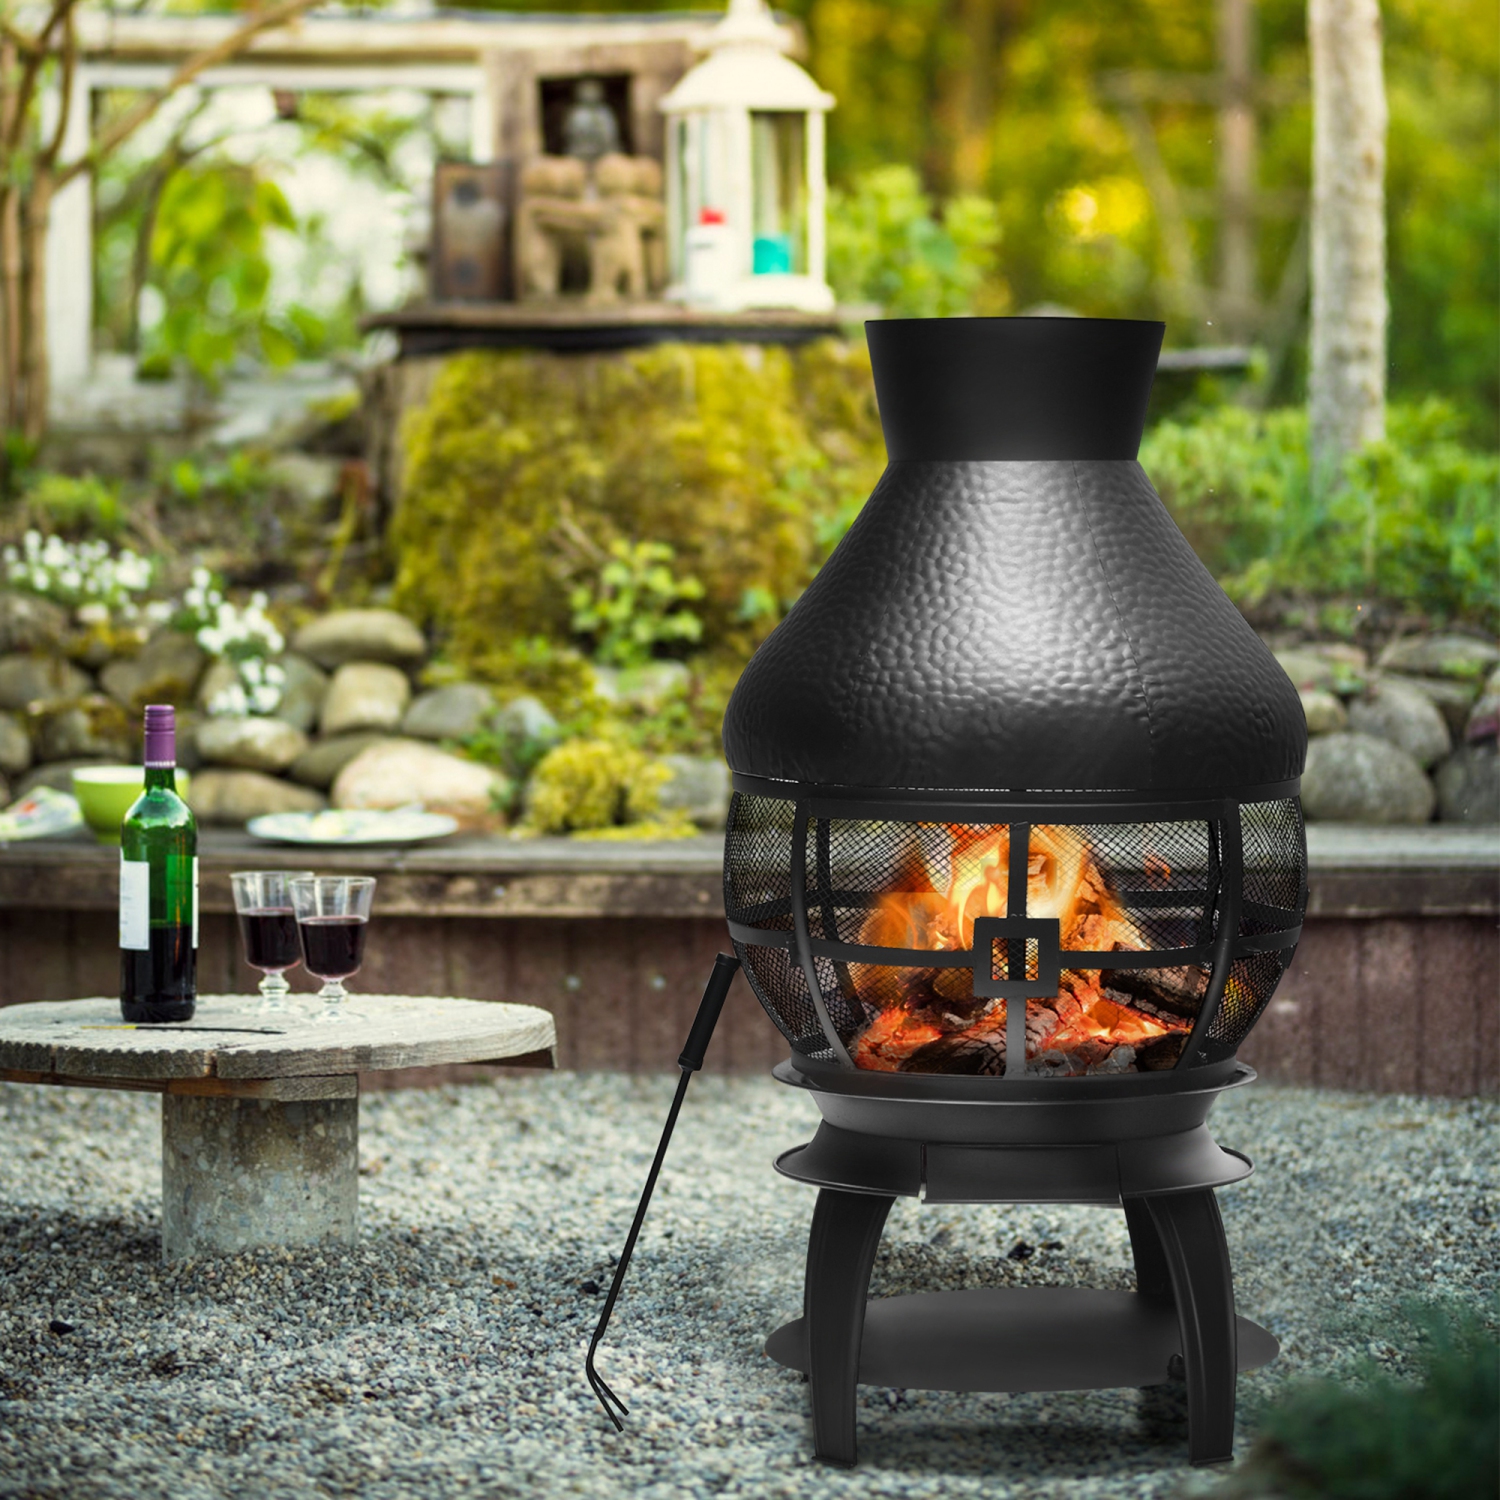 Bali Chiminea Fireplace Outdoor Patio Fire Pit Wood Burning Heater Cast Iron US 